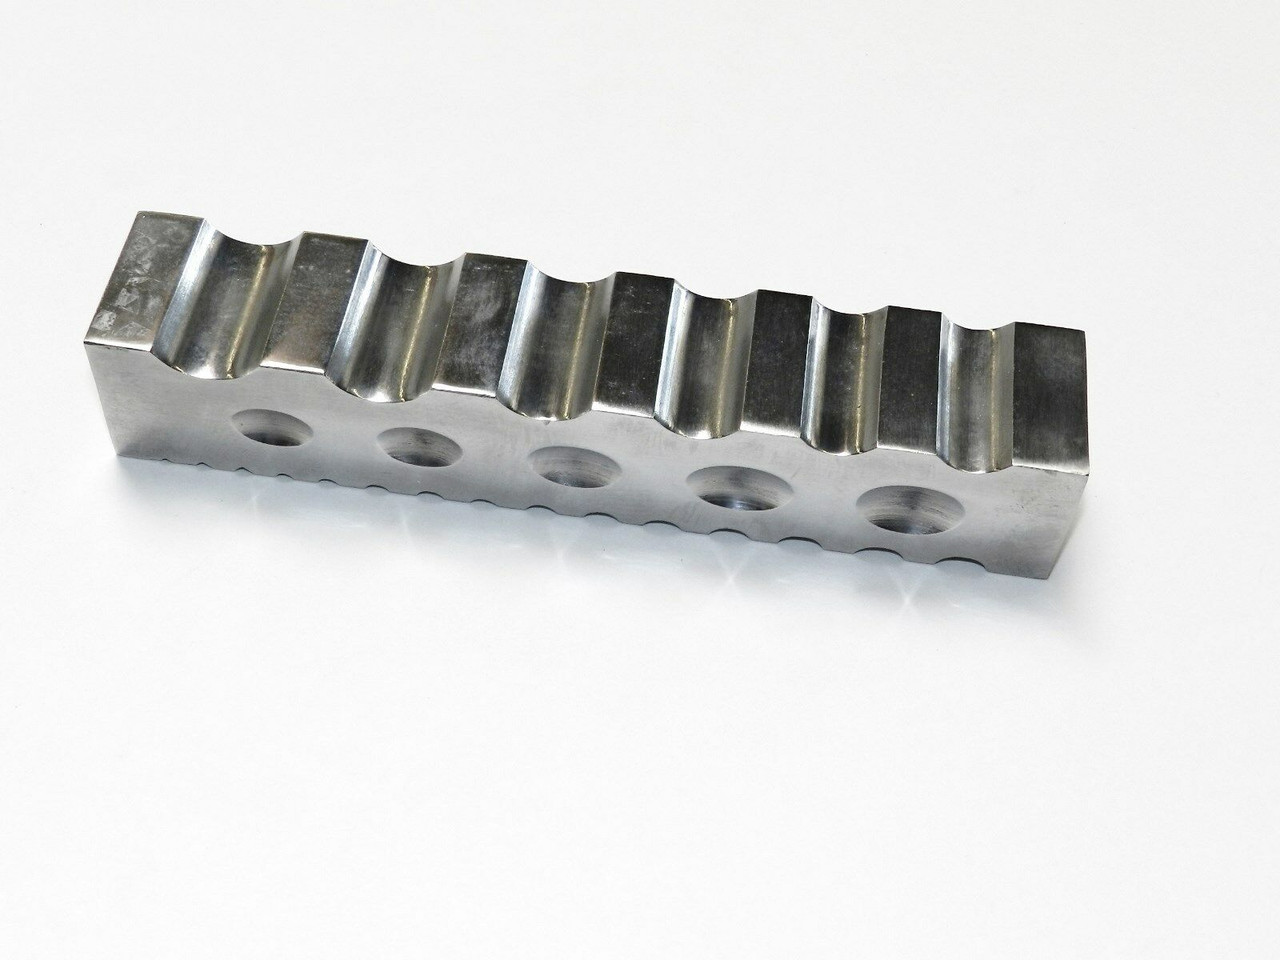  Steel Block Design Forming Dapping Doming Jewelry Bending & Shaping Swage Tool